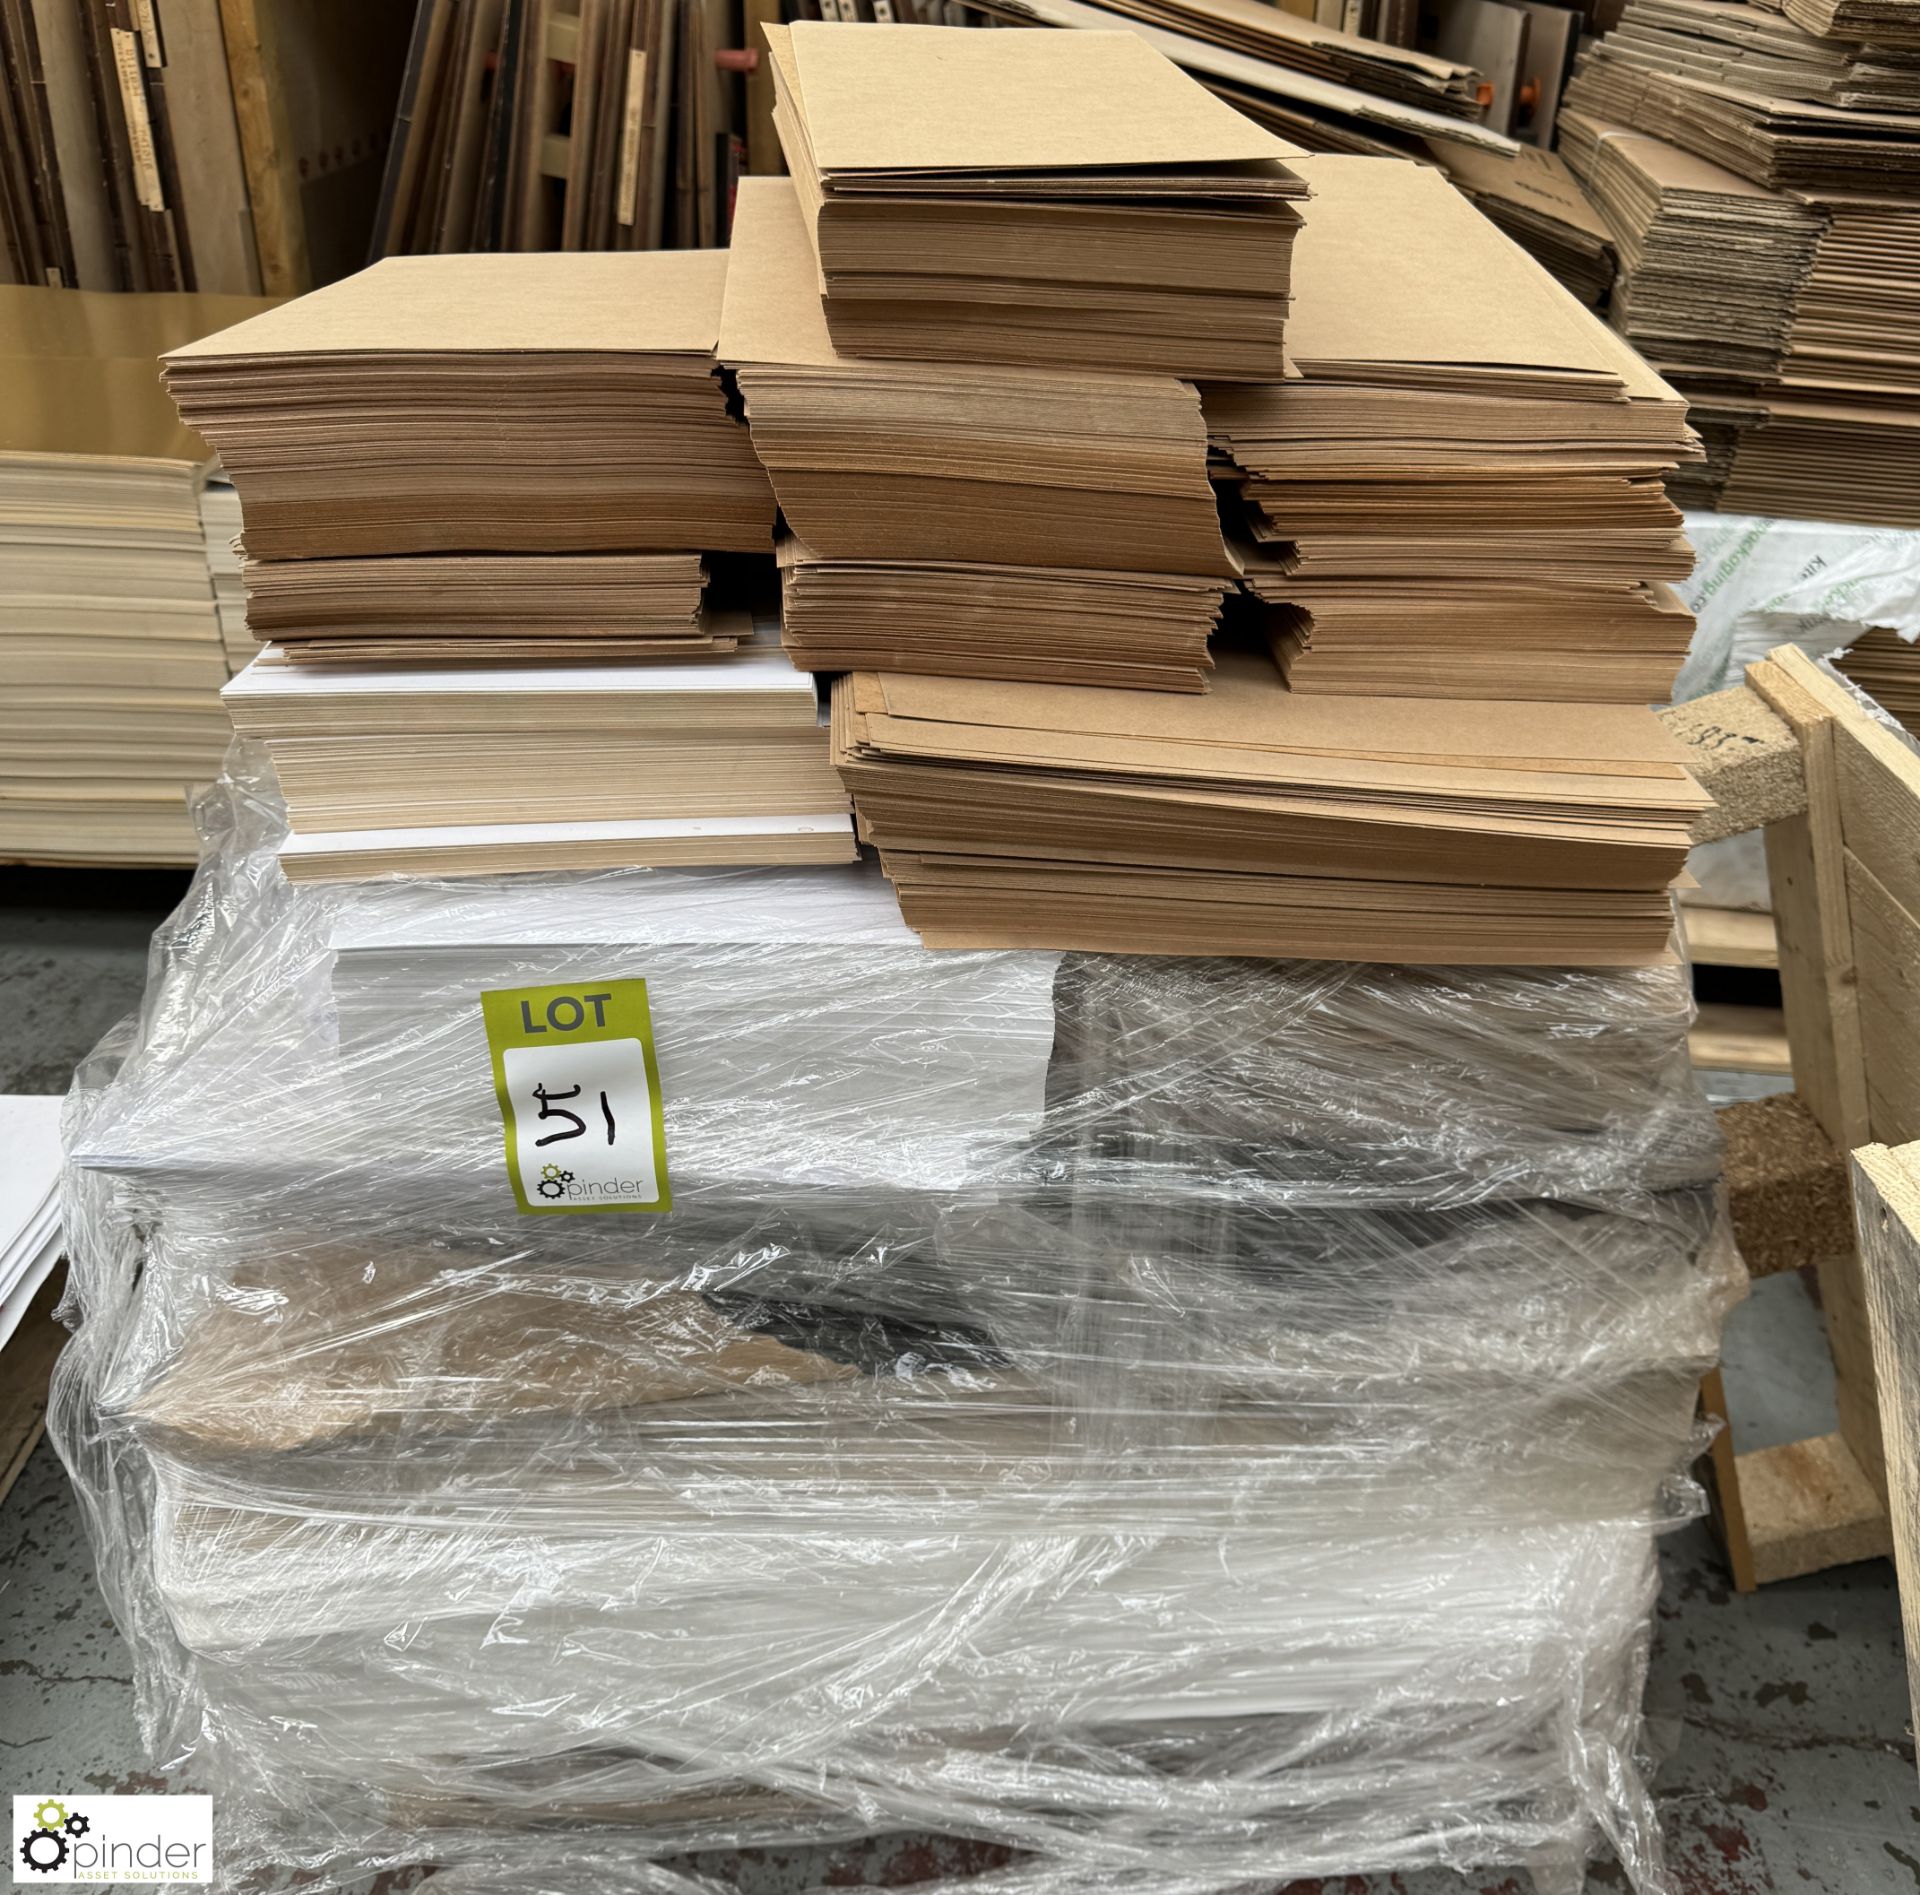 Quantity various Cut Card/Board, to pallet